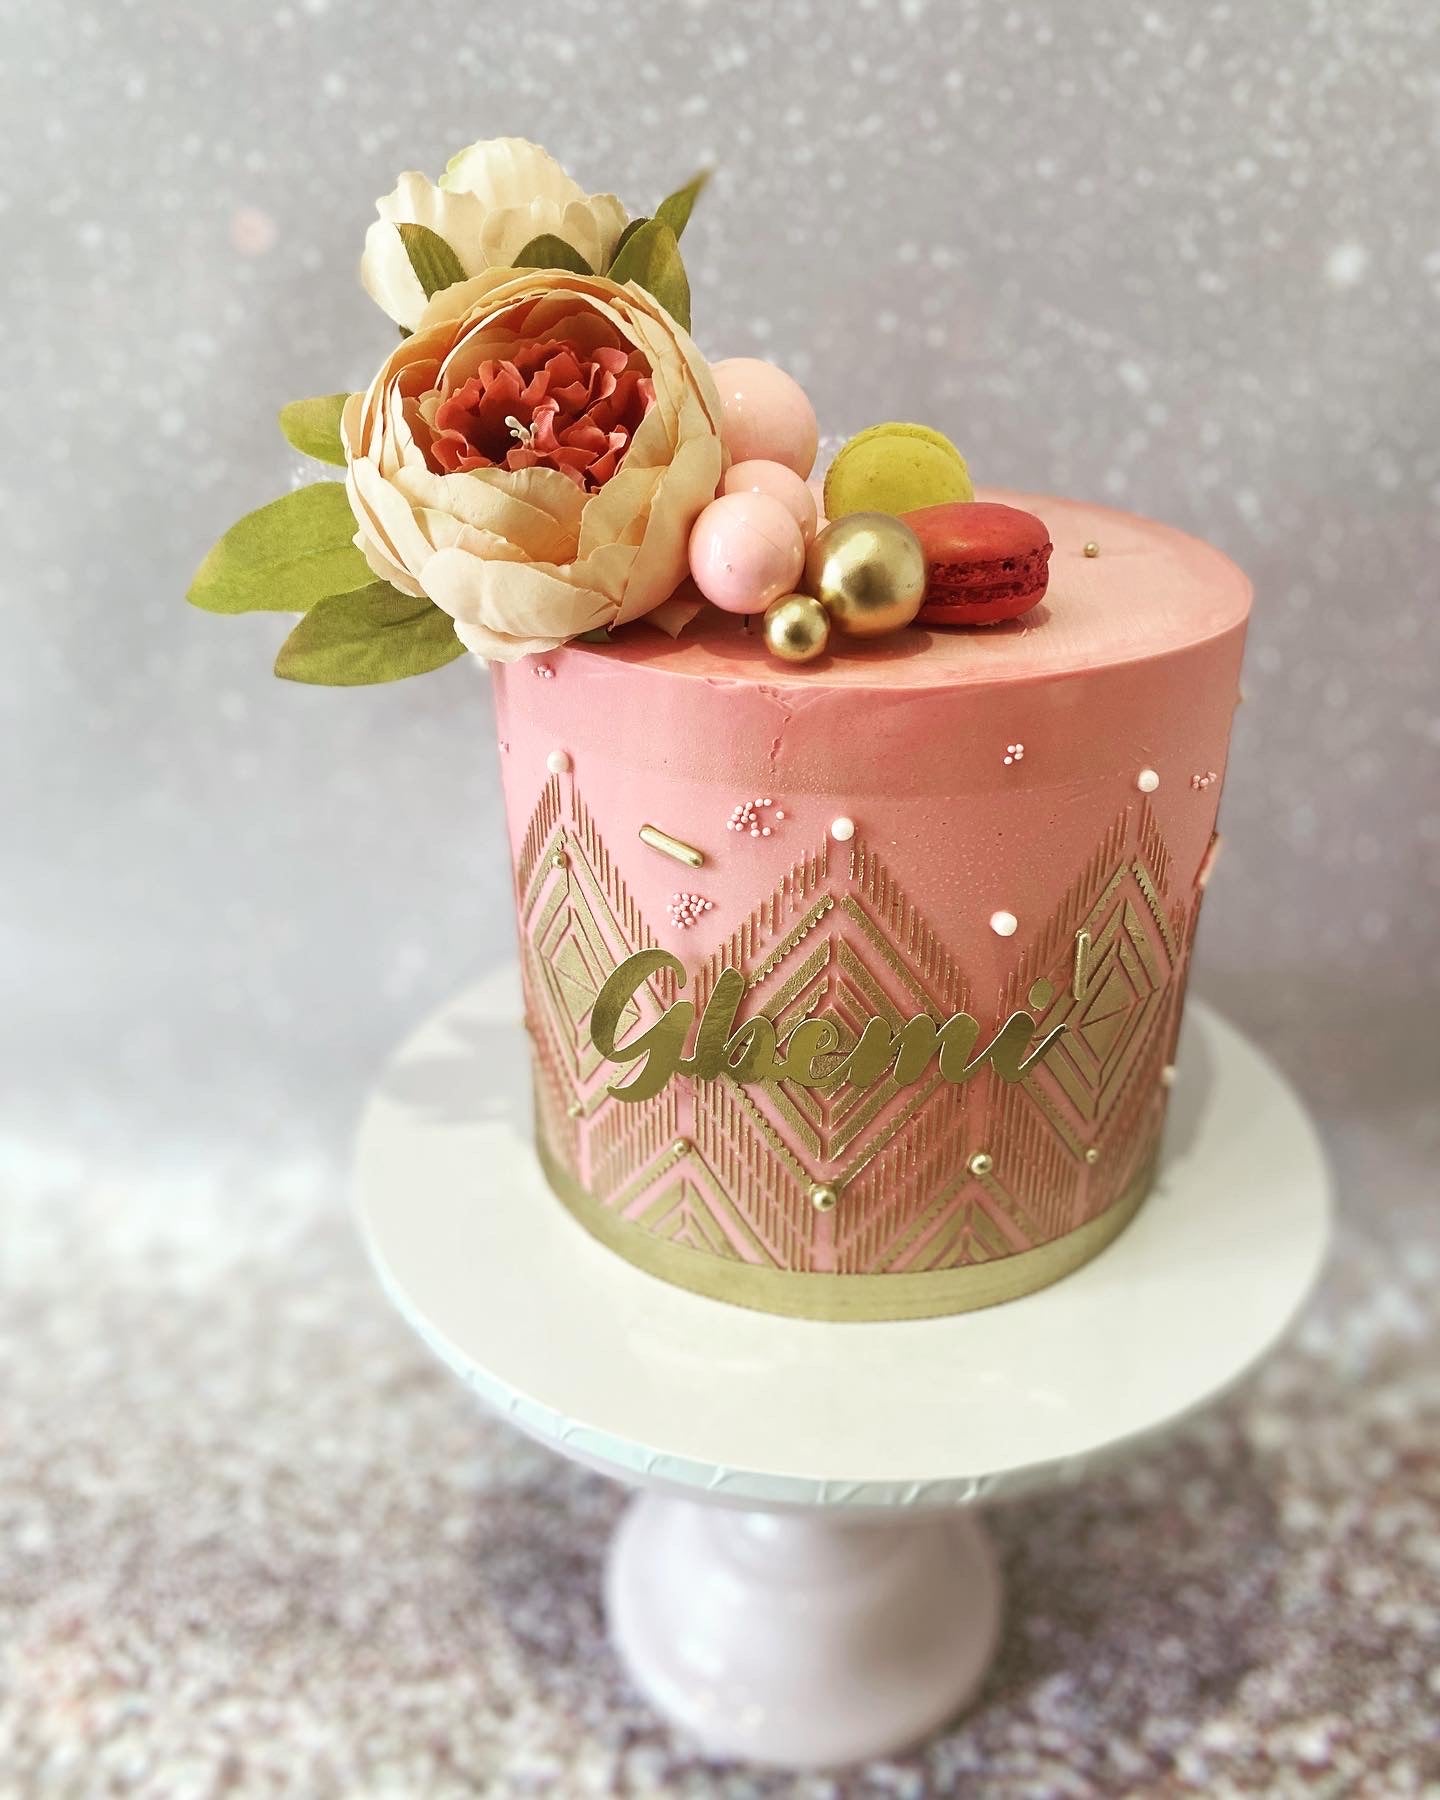 Pink and gold stencil cake